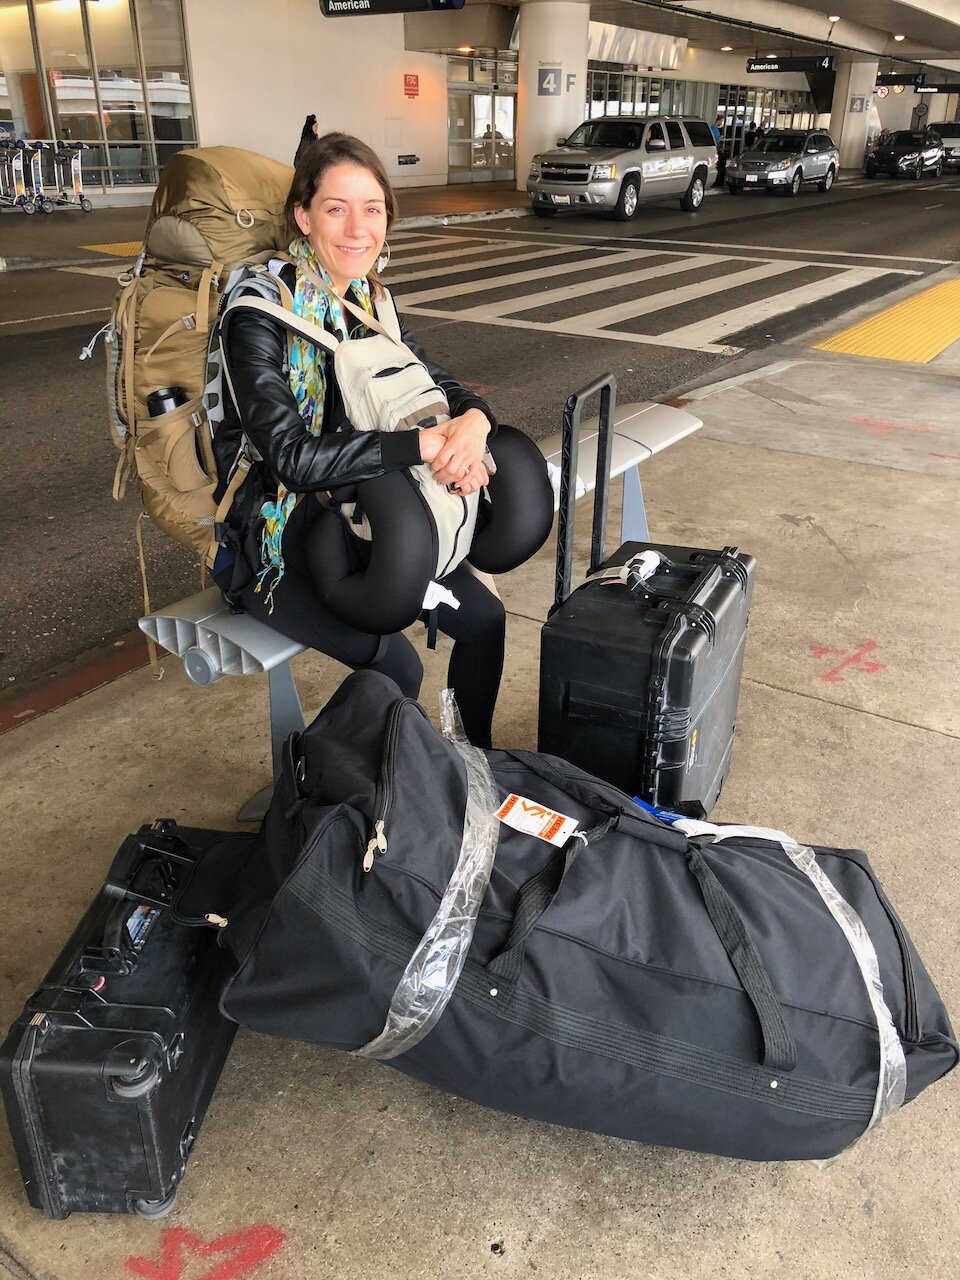  SO.MUCH.LUGGAGE (and excitement)! At LAX, ready to move into our RV. 5/20/18 